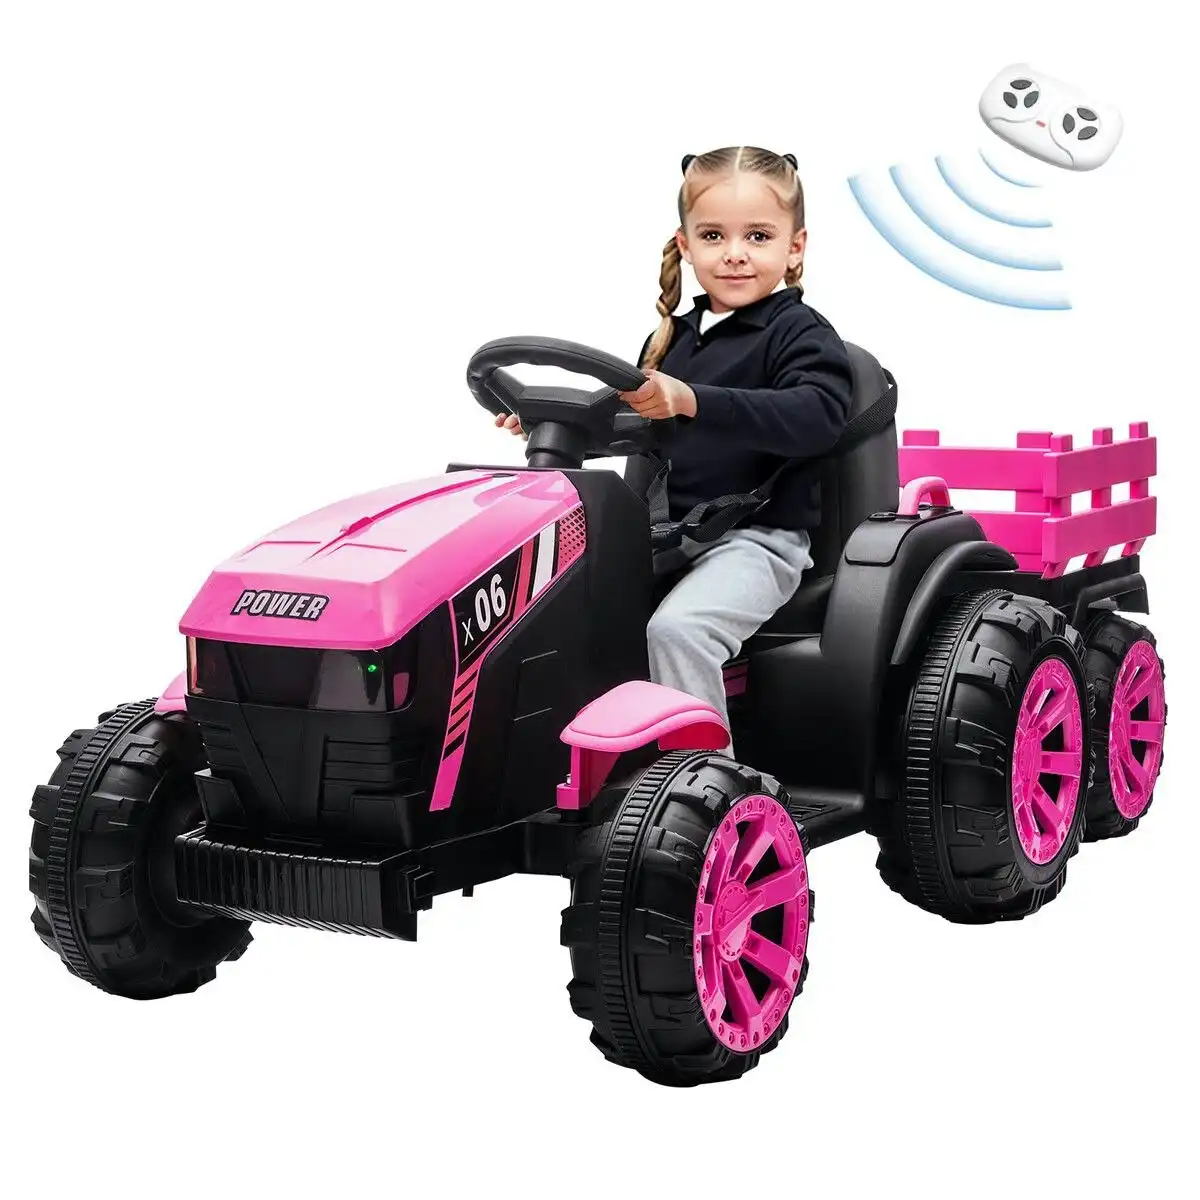 Ausway Kids Electric Cars Ride On Toy Tractor Trailer Vehicle Parental Remote Control Pink 12V Battery MP3 Safety Belt LED Light